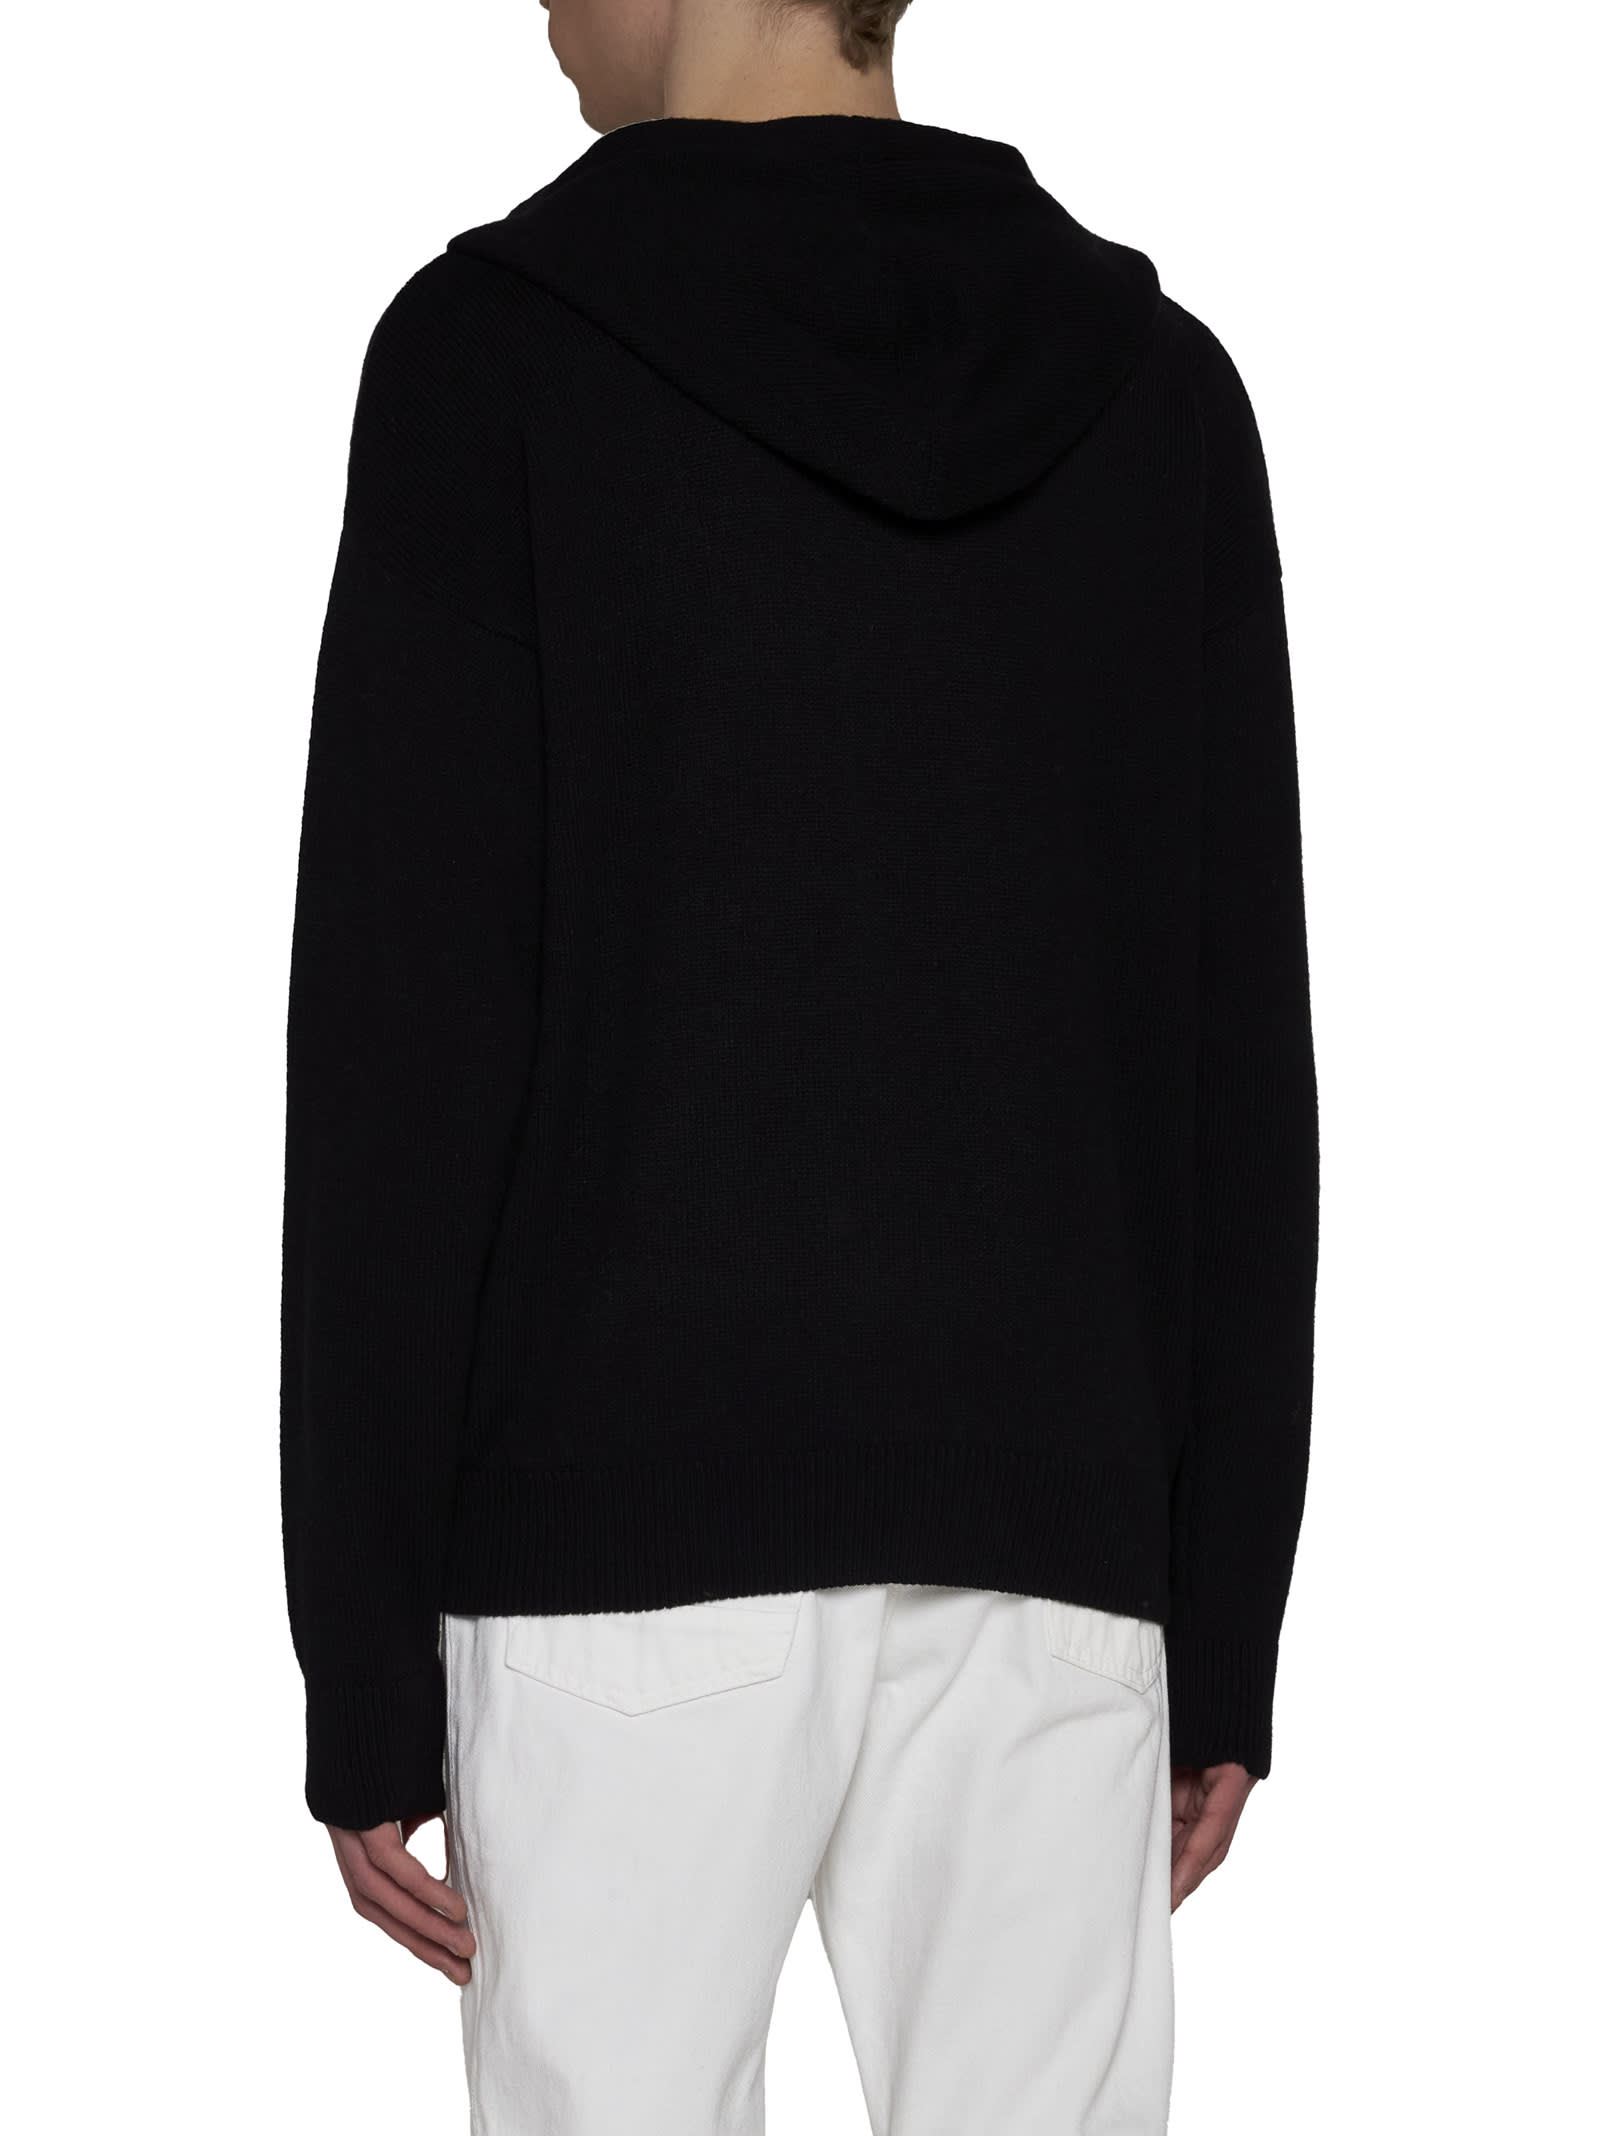 Shop Palm Angels Sweater In Black Off White